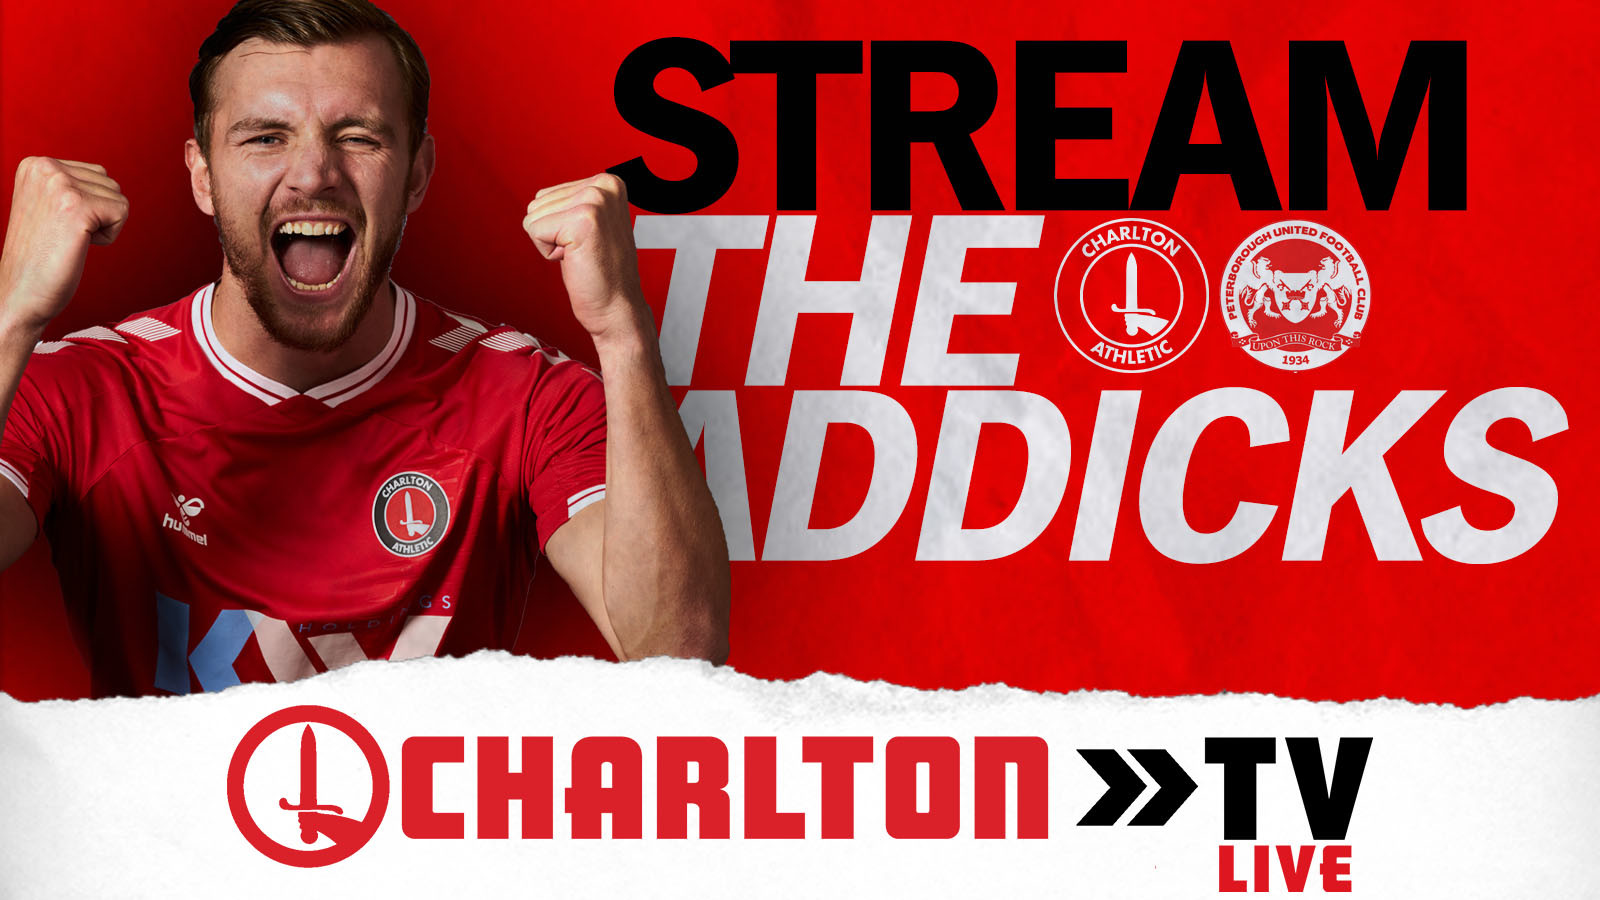 Get your Charlton TV Live streaming pass for Peterborough United Charlton Athletic Football Club